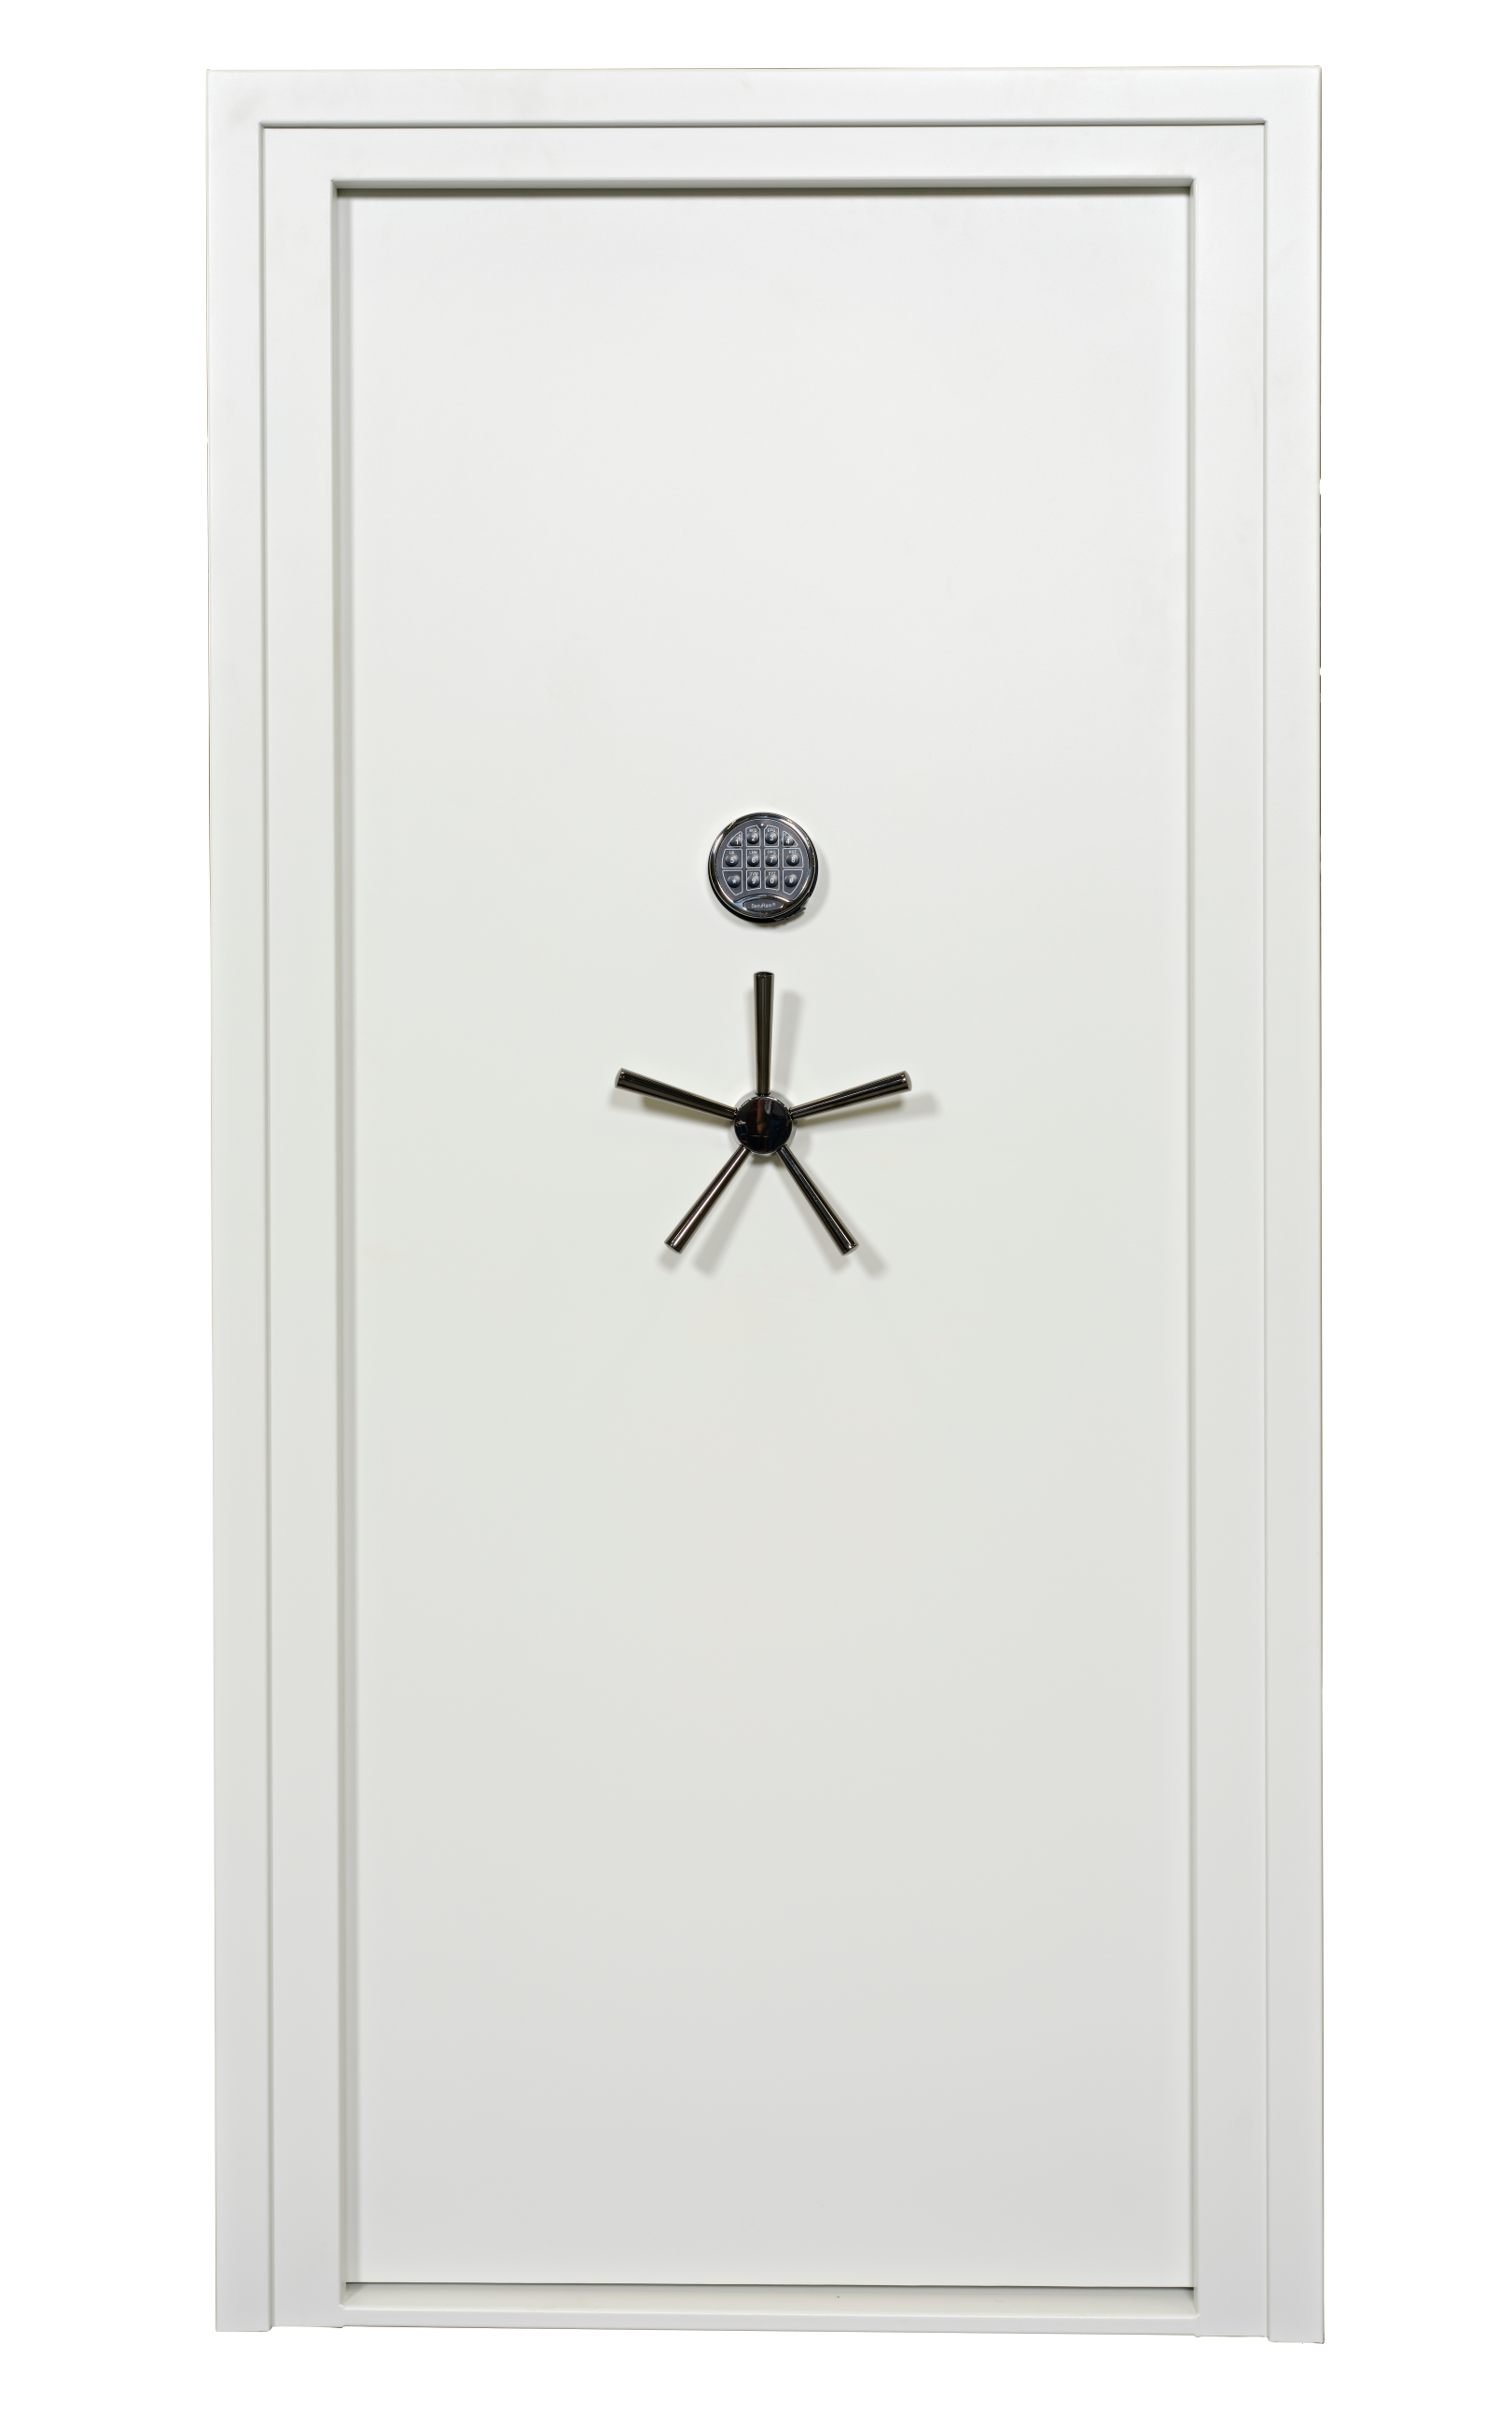 Vault Doors for Panic Rooms & Walk-In Safes - Safe and Vault Store.com